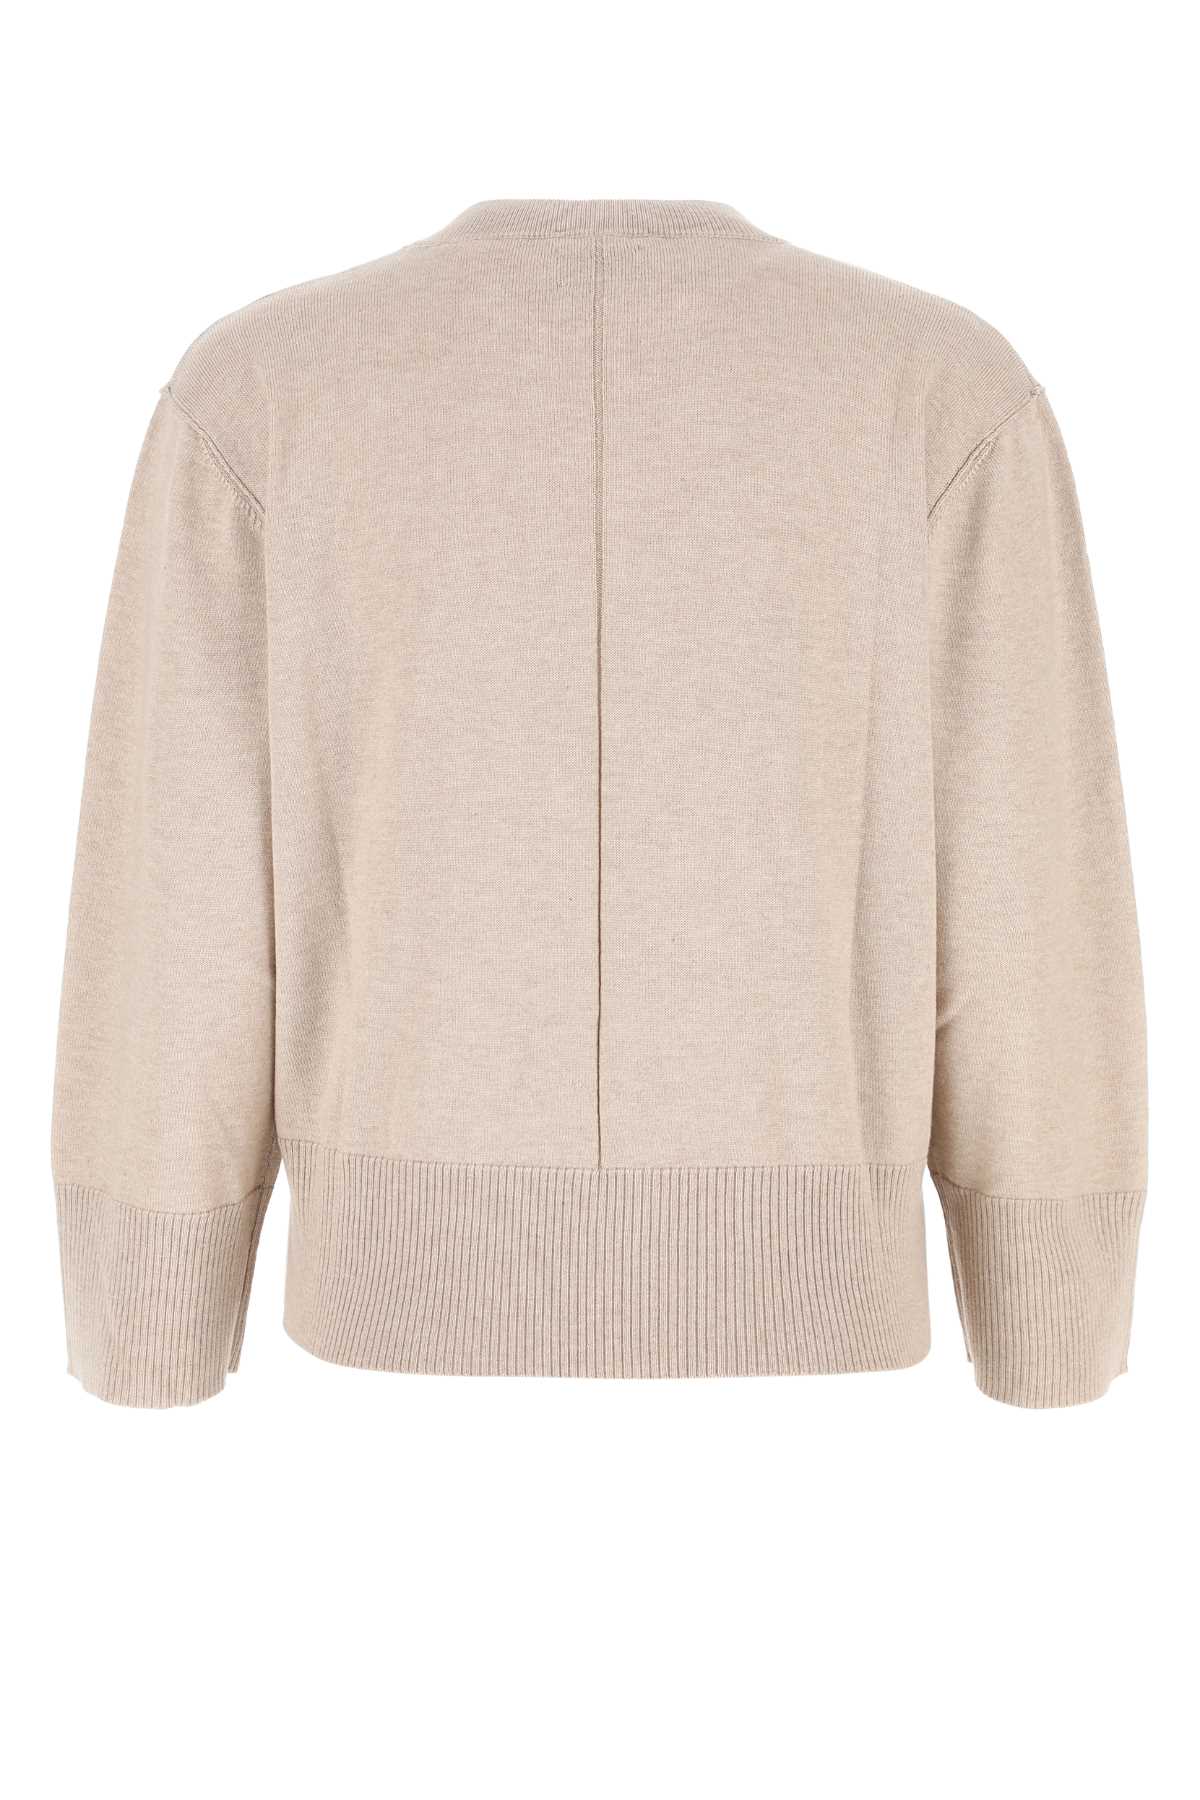 Woolrich Cappuccino Cotton Blend Sweater In 824